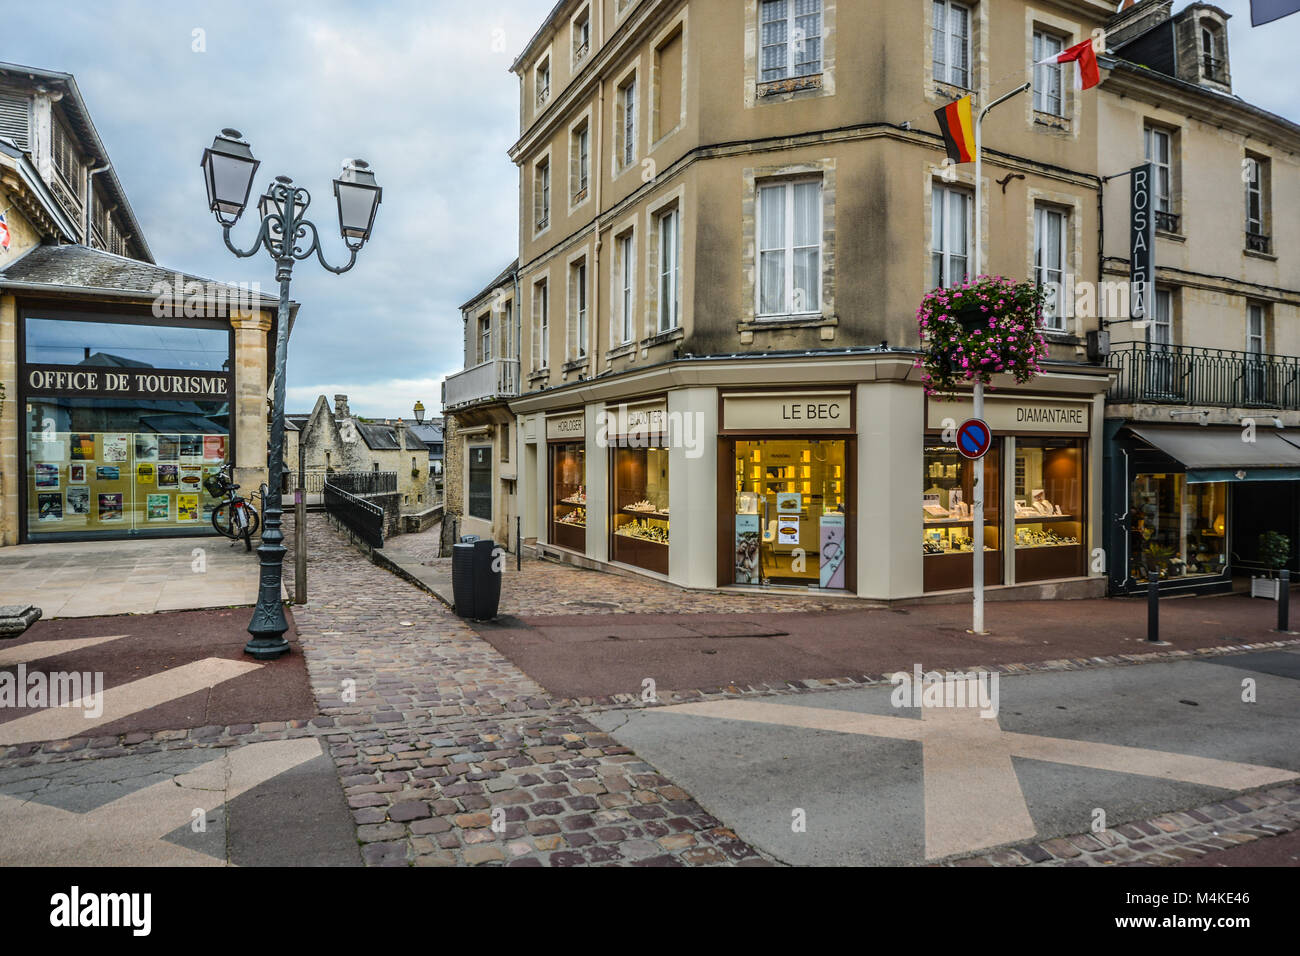 Shops and the office de tourisme along the main road through the medieval town of Bayeux in the Normandy region of France Stock Photo